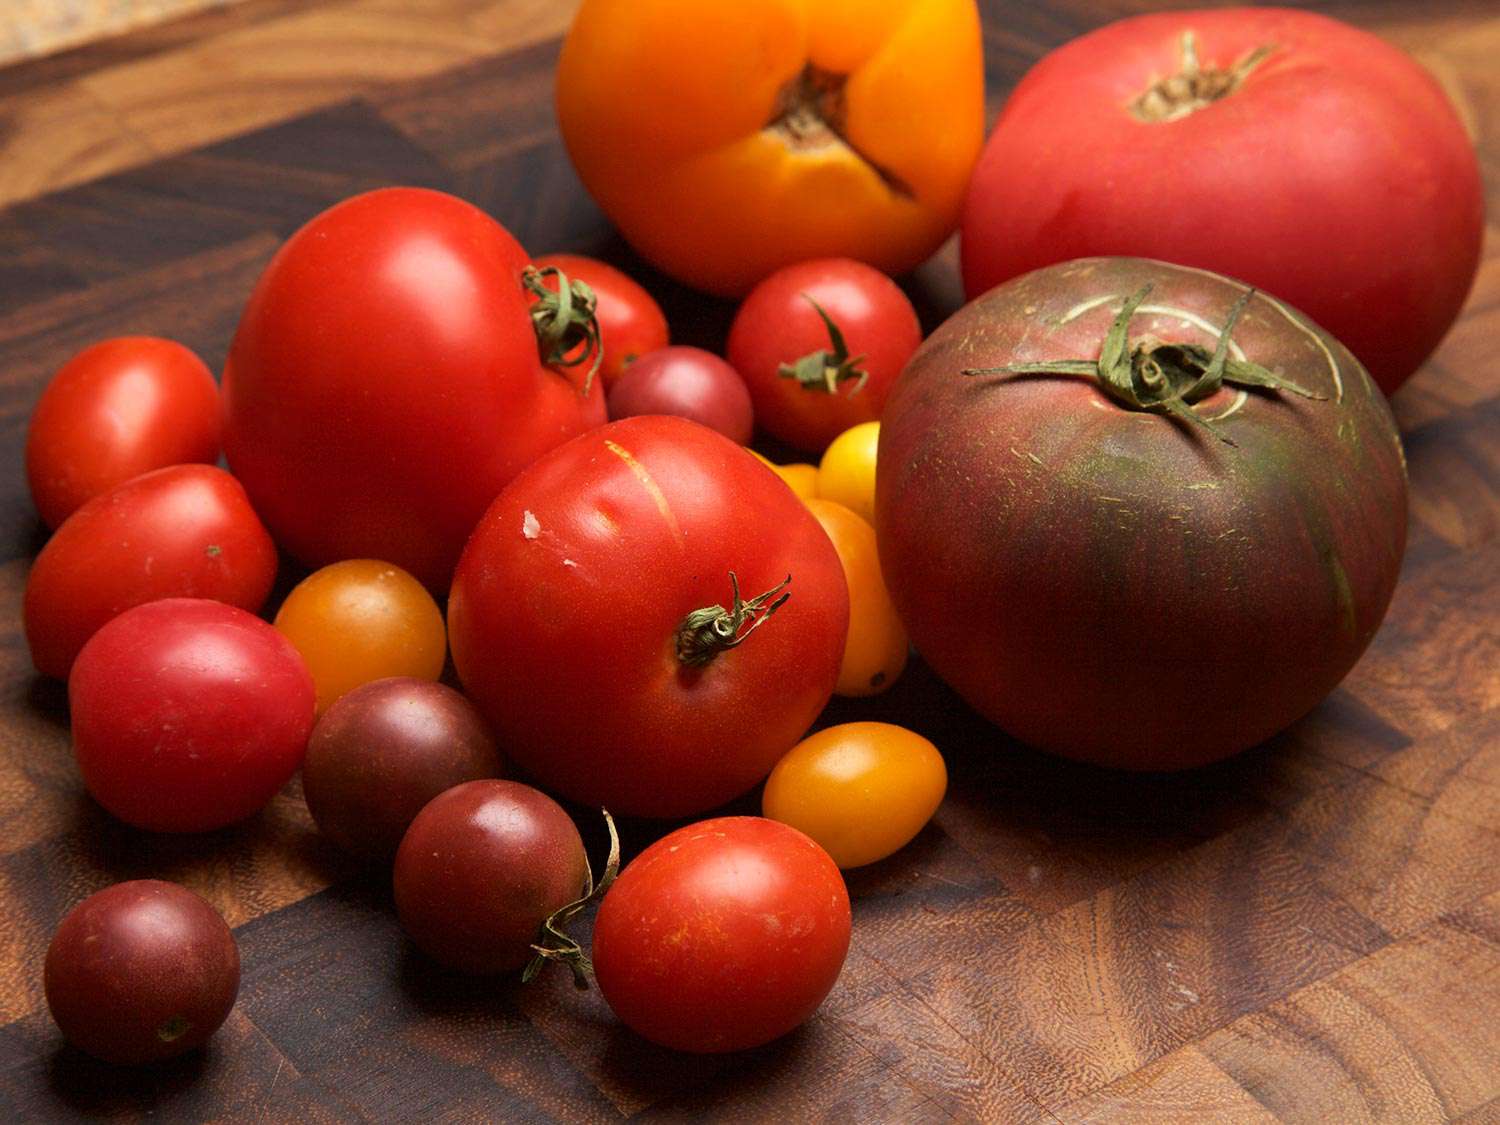 An assortment of ripe tomatoes of different colors and sizes, on a wooden chopping board